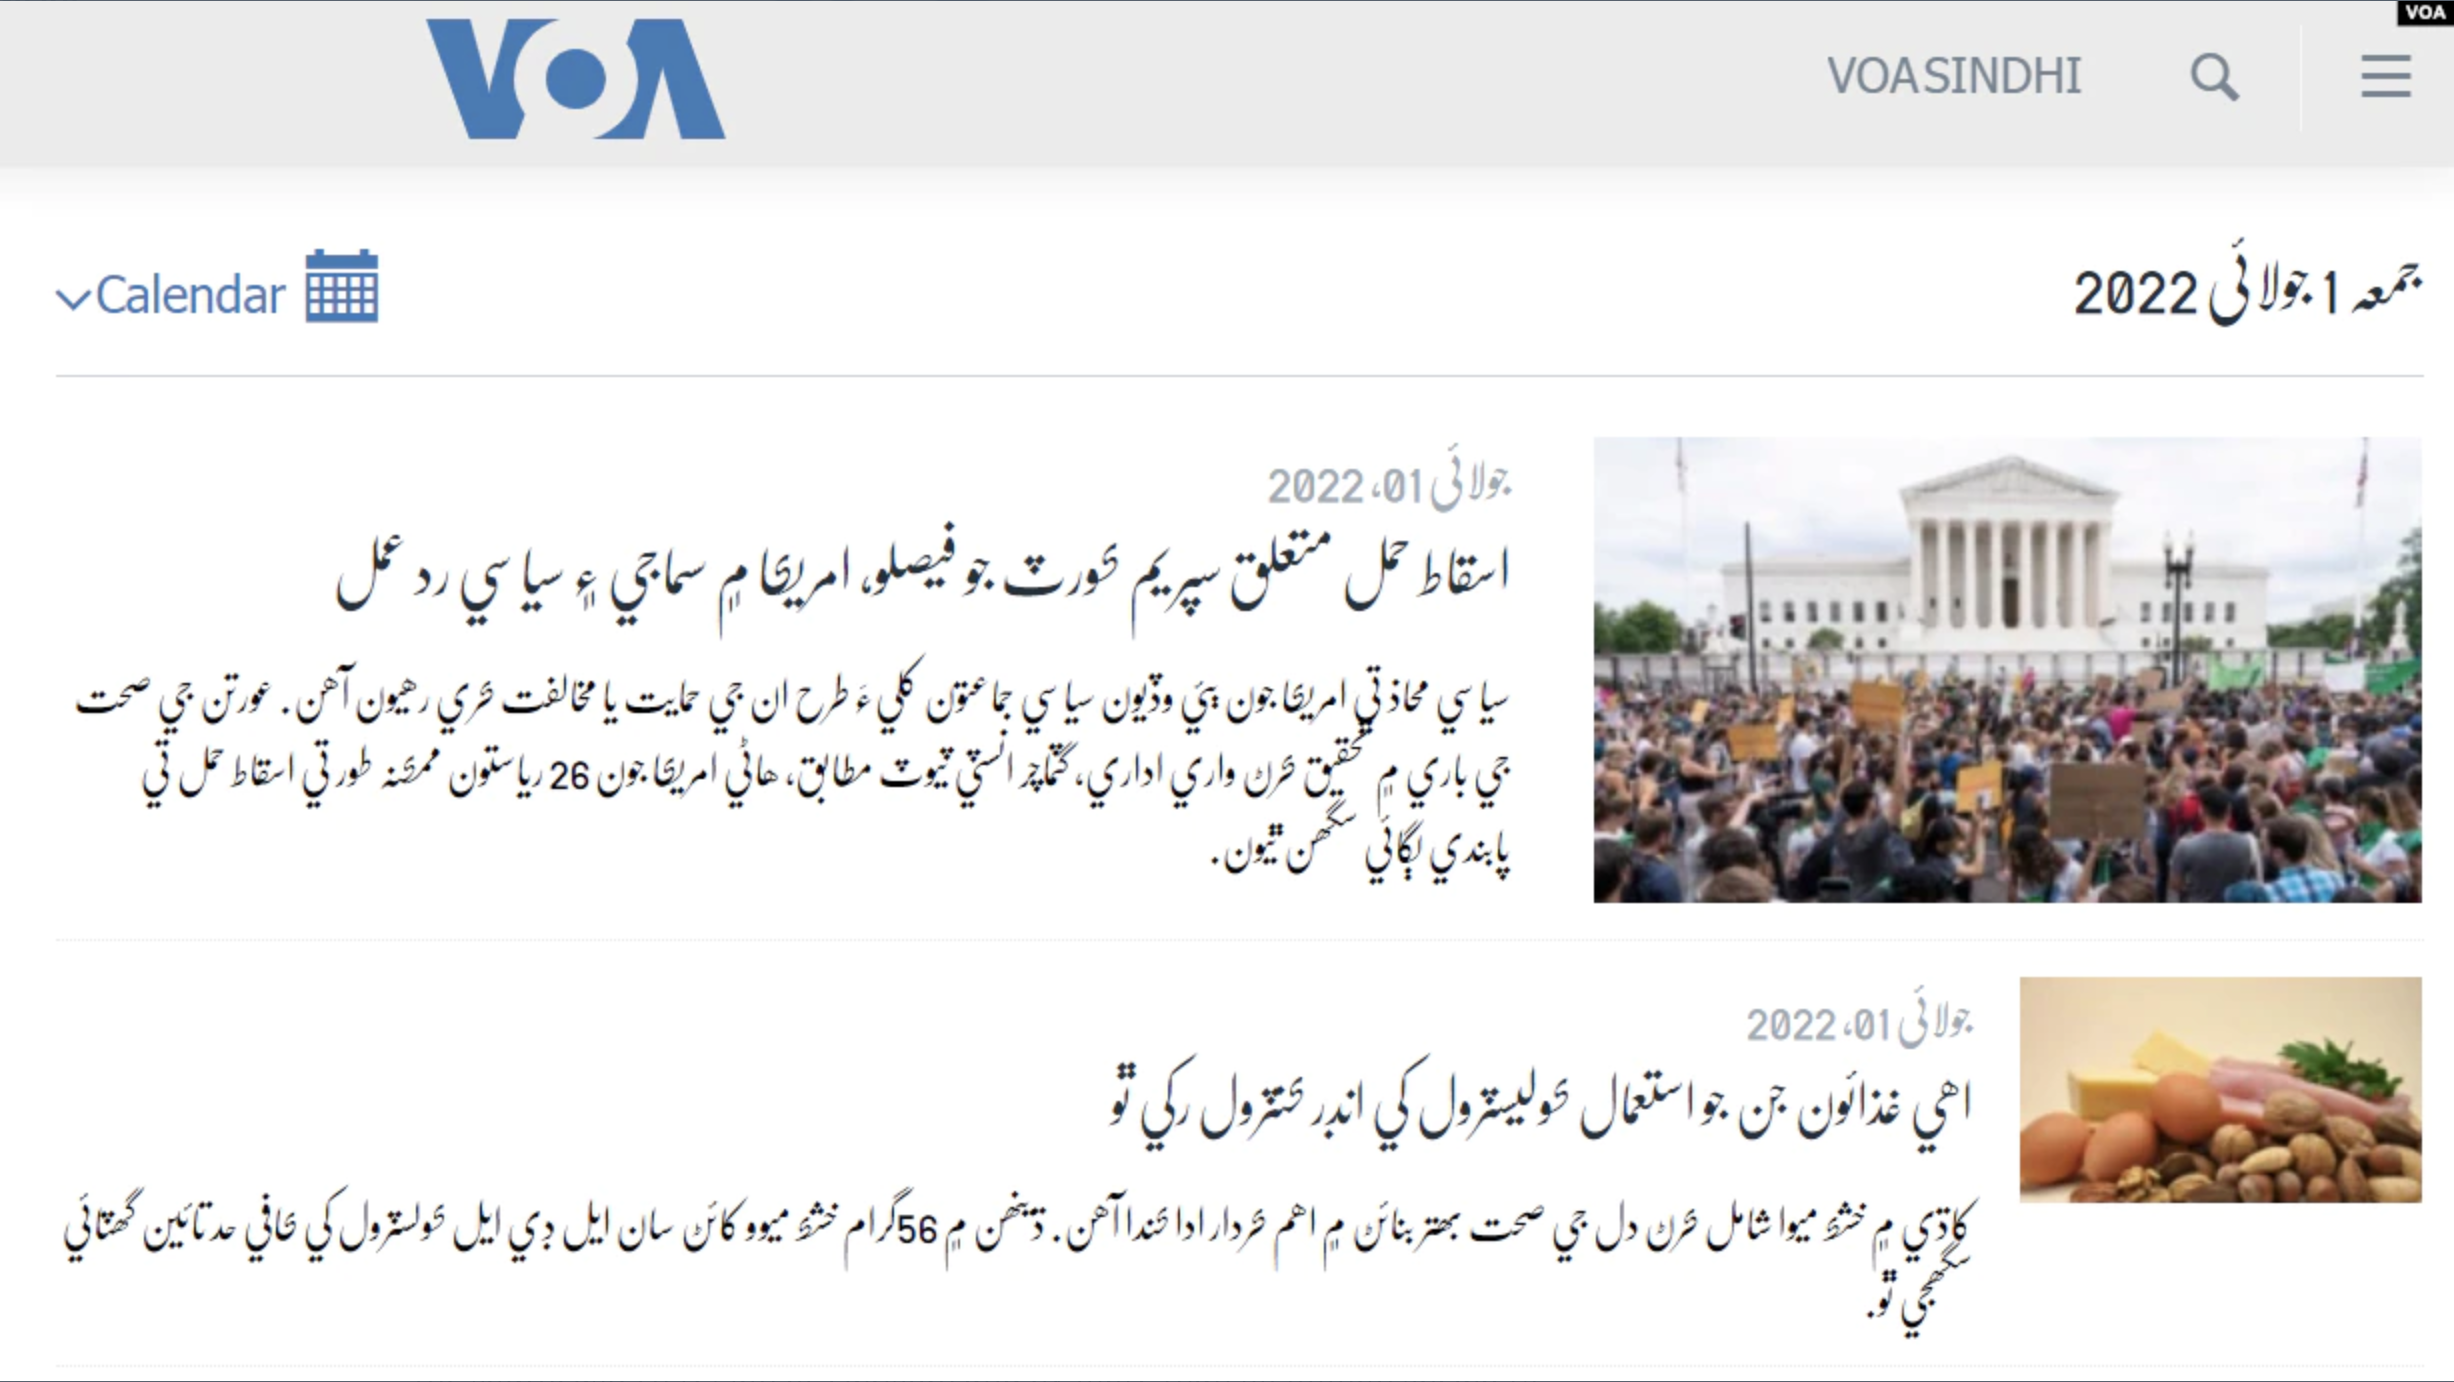 VOA launches programming in Sindhi